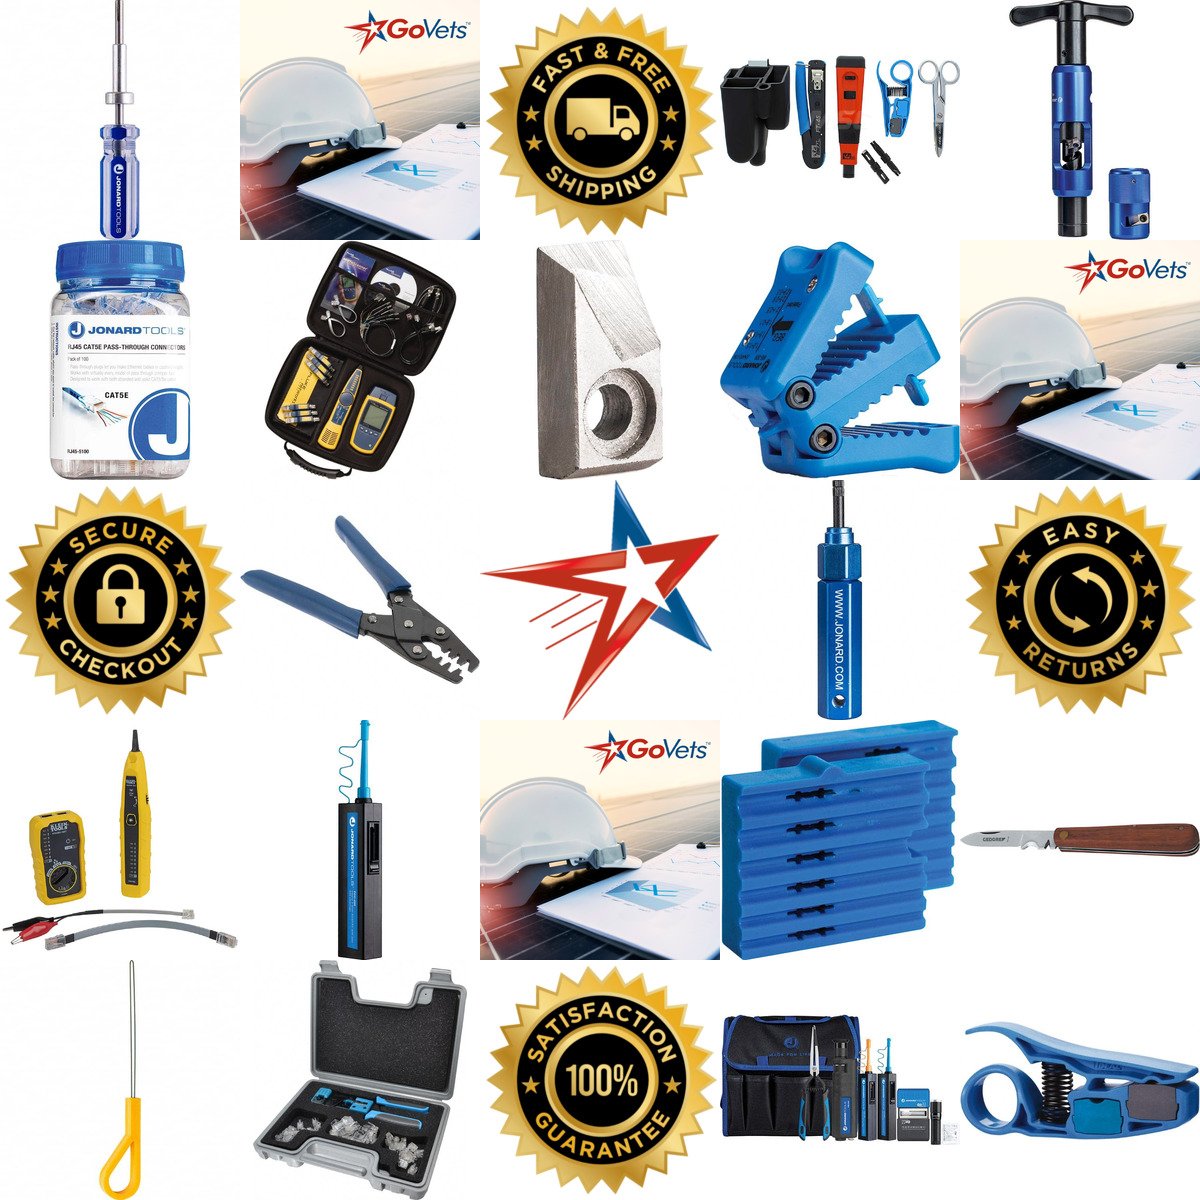 A selection of Cable Tools and Kits products on GoVets